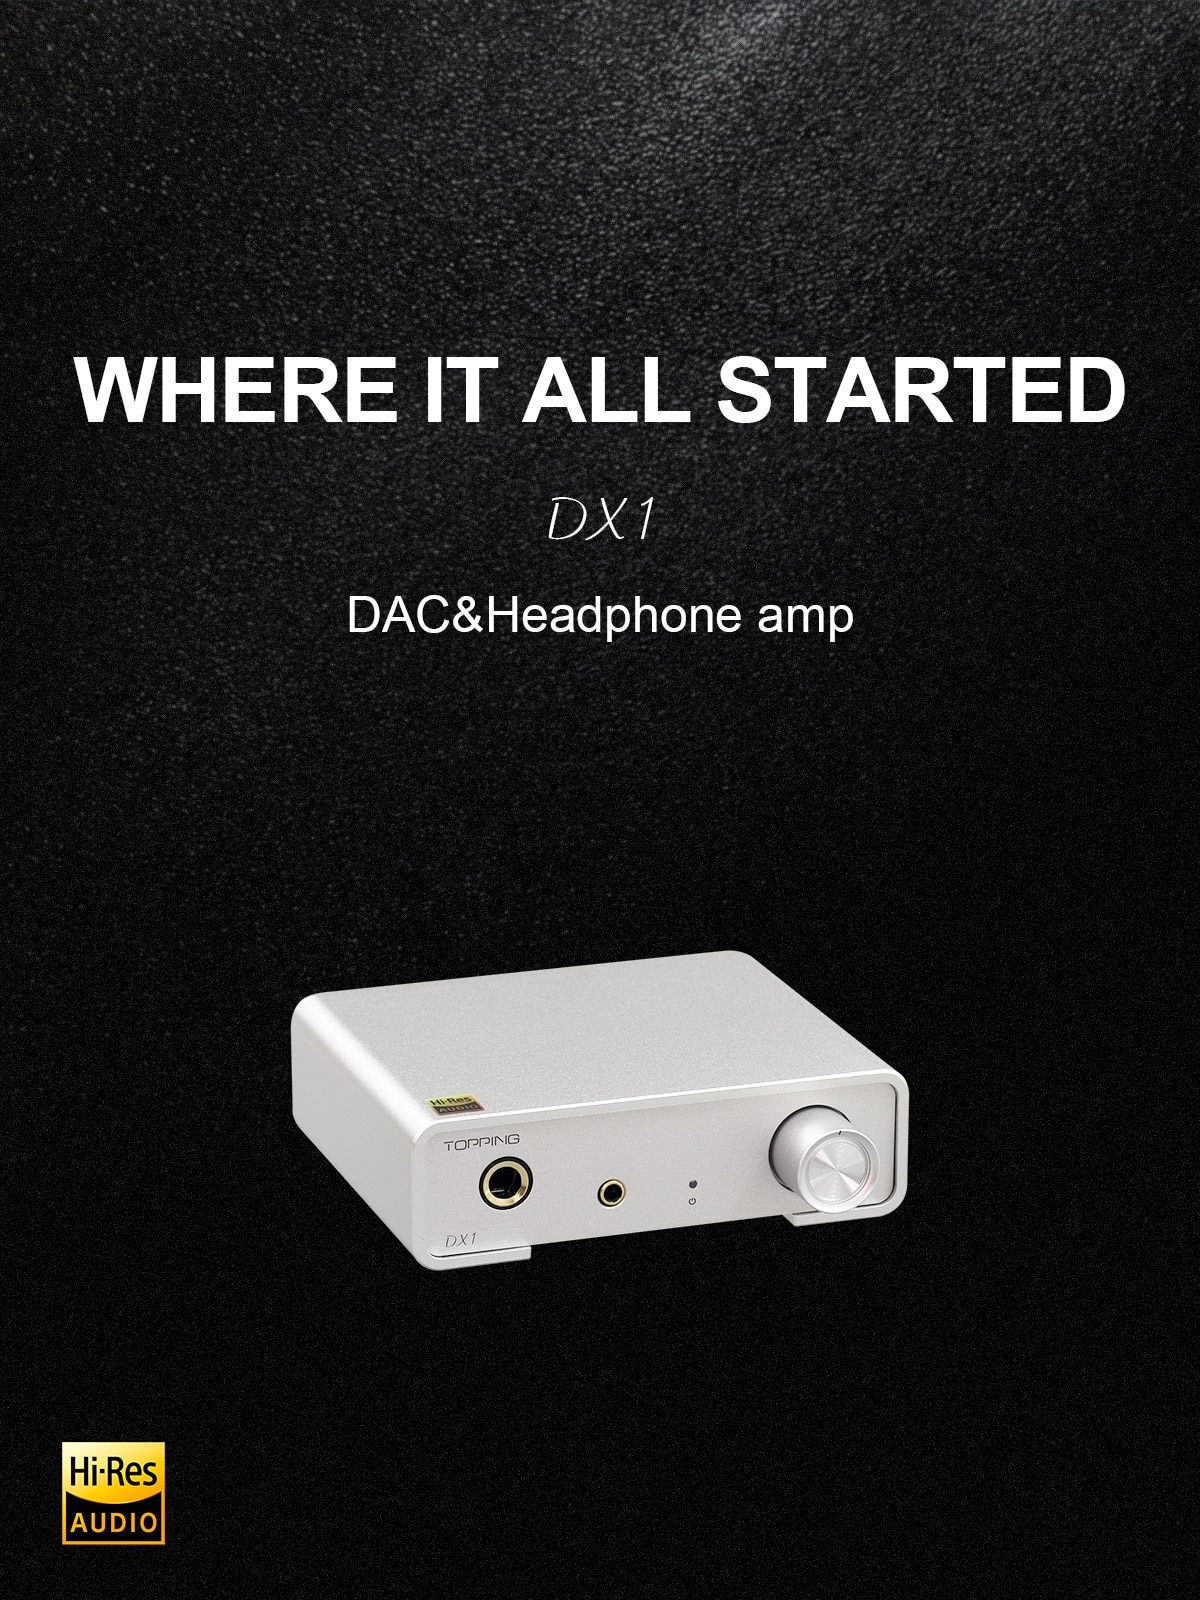 TOPPING-DX1-HiRes-Audio-DACHeadphone-Amplifier-Newest-AK4493S-00002-THDN-Support-Up-To-DSD256-And-PCM384-XMOS-XU208-Decoder-3256804581026420